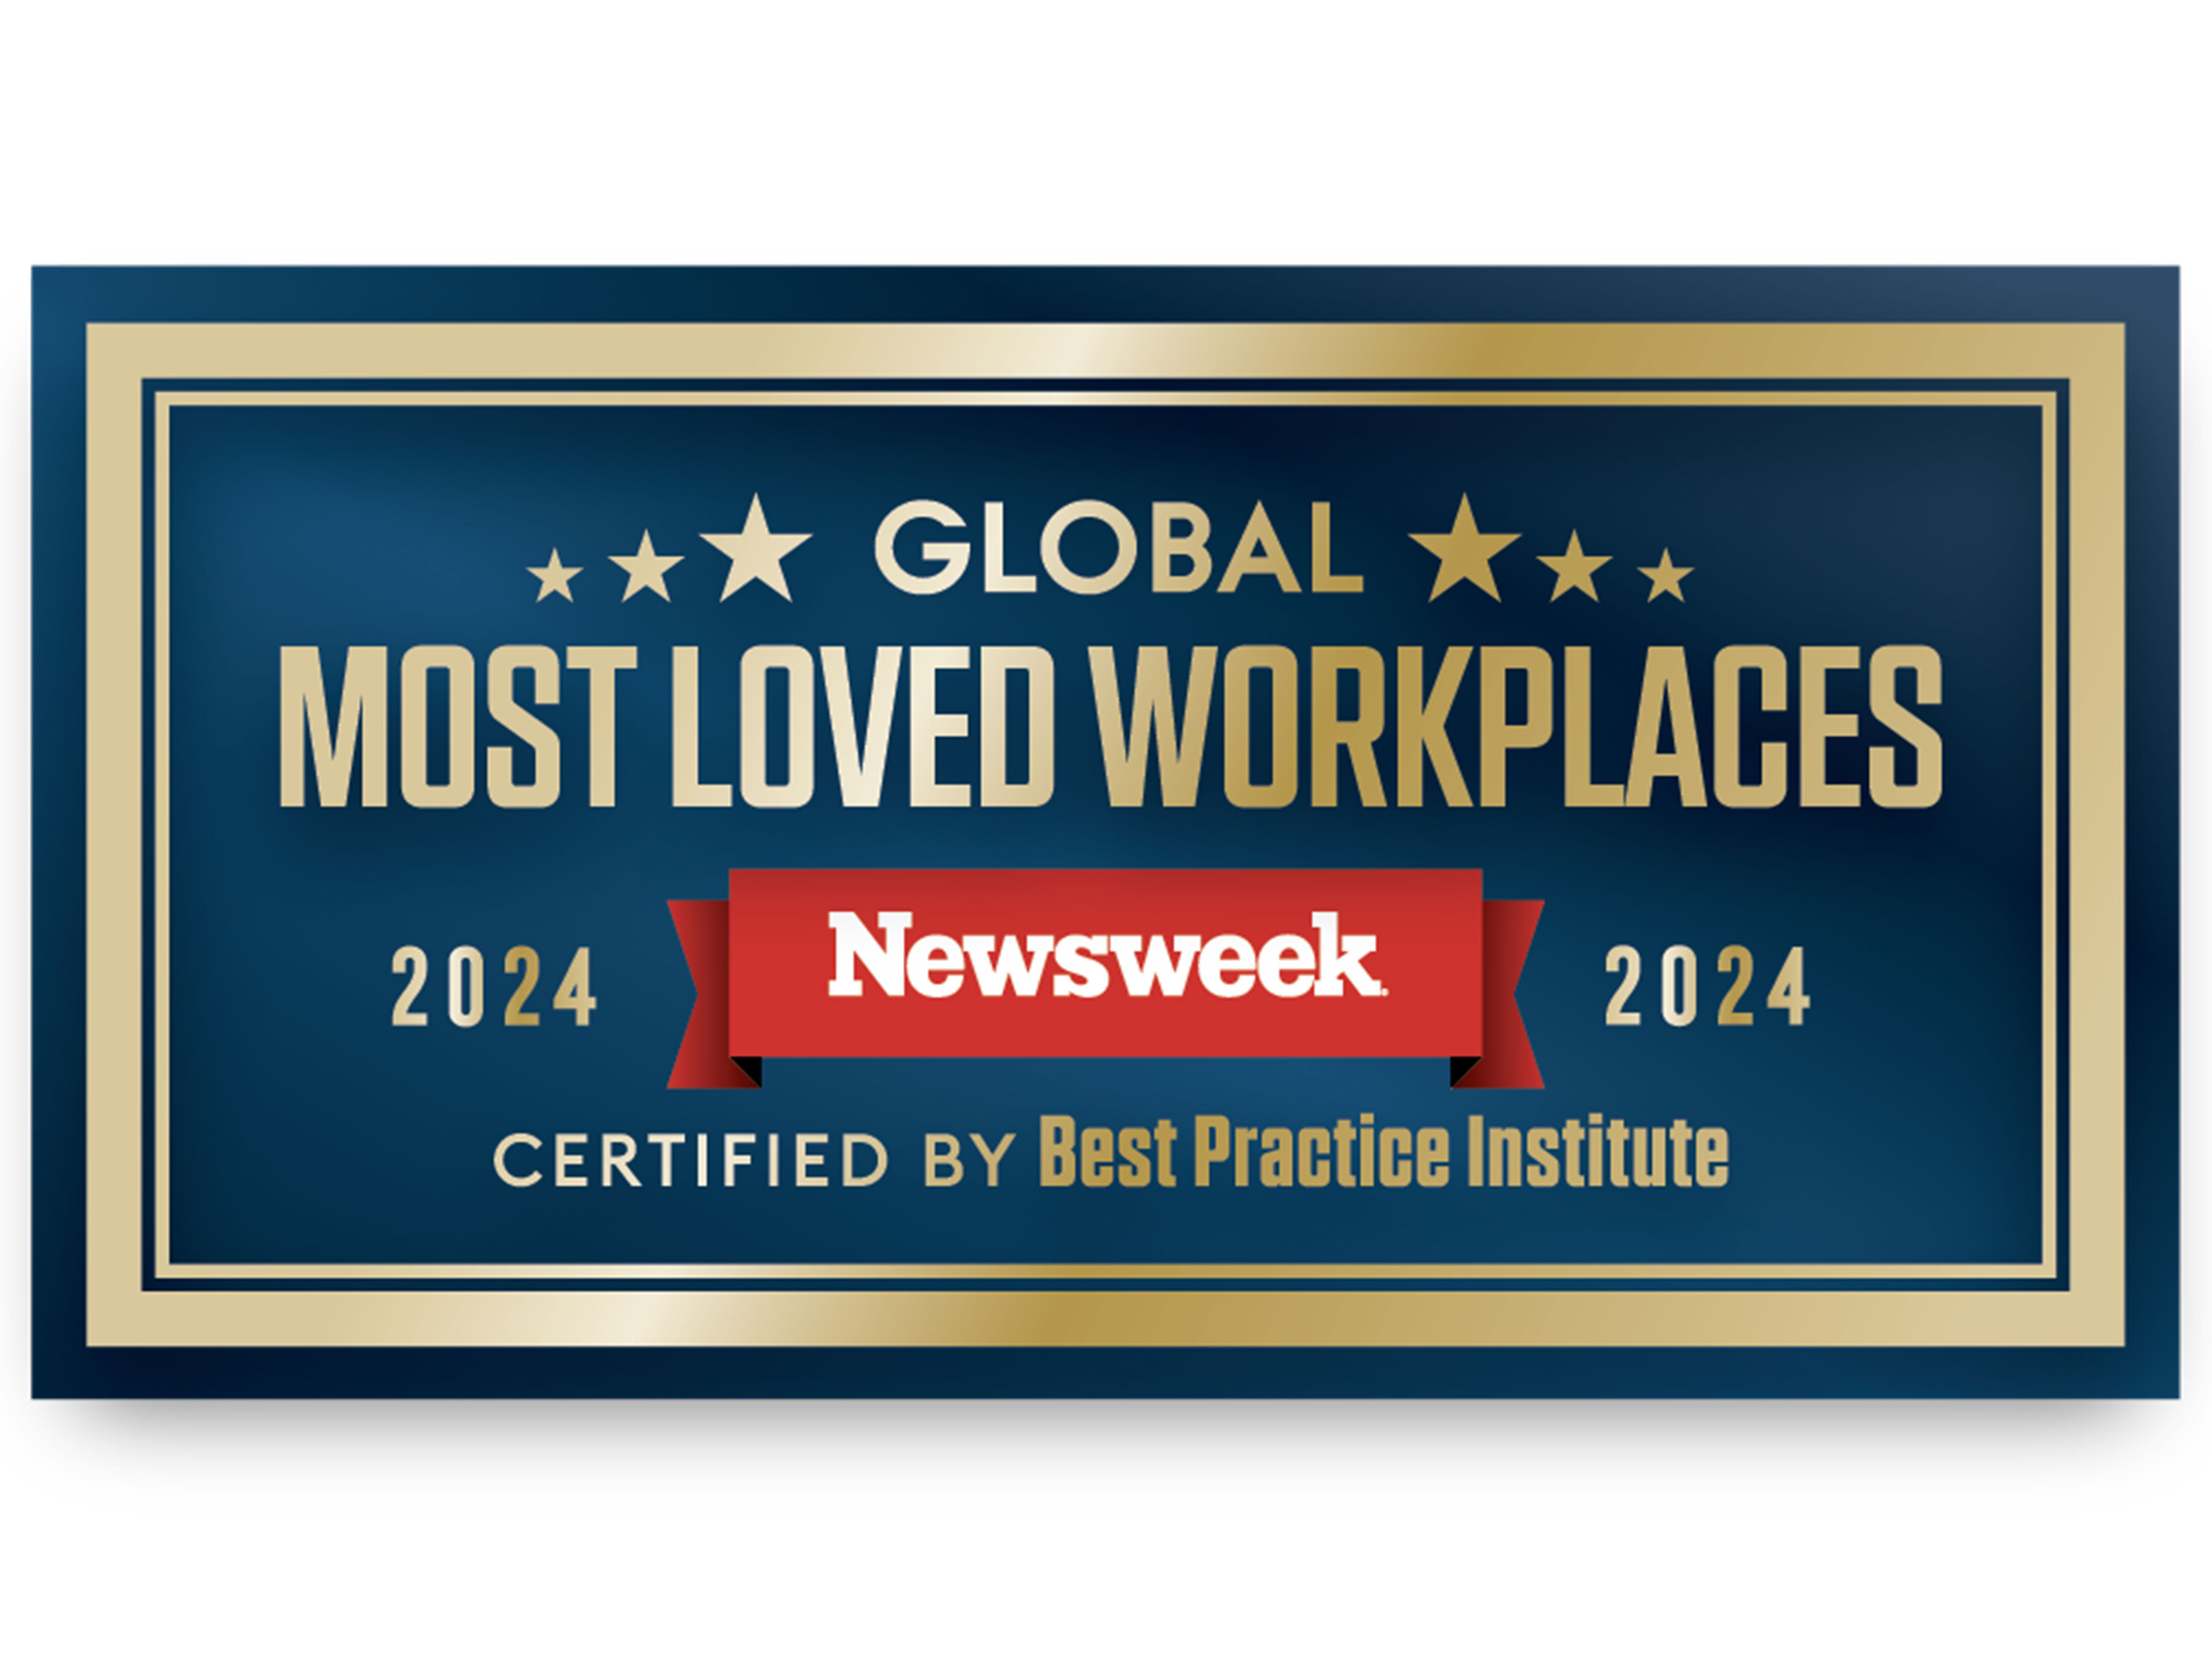 Zebra Technologies ranked #78 of Global Most Loved Workplaces® among the top 100 companies